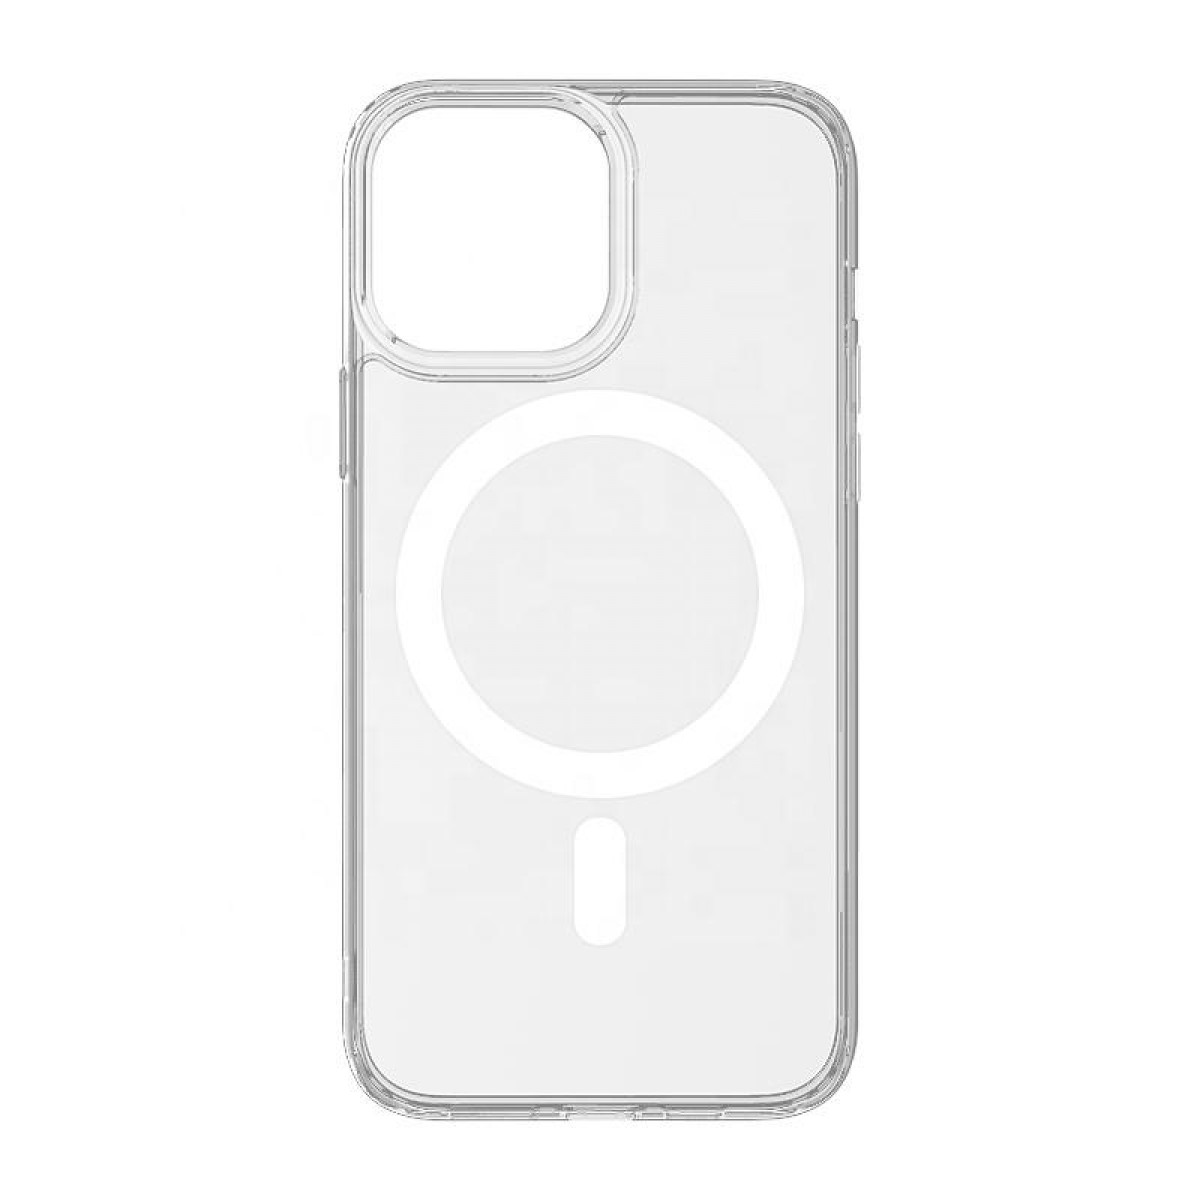 iPhone, iPhone Max iPhone 11 11 Backcover, Pro Handyhülle für Max, Pro INF MagSafe-Ladegerät Transparent, Weiß